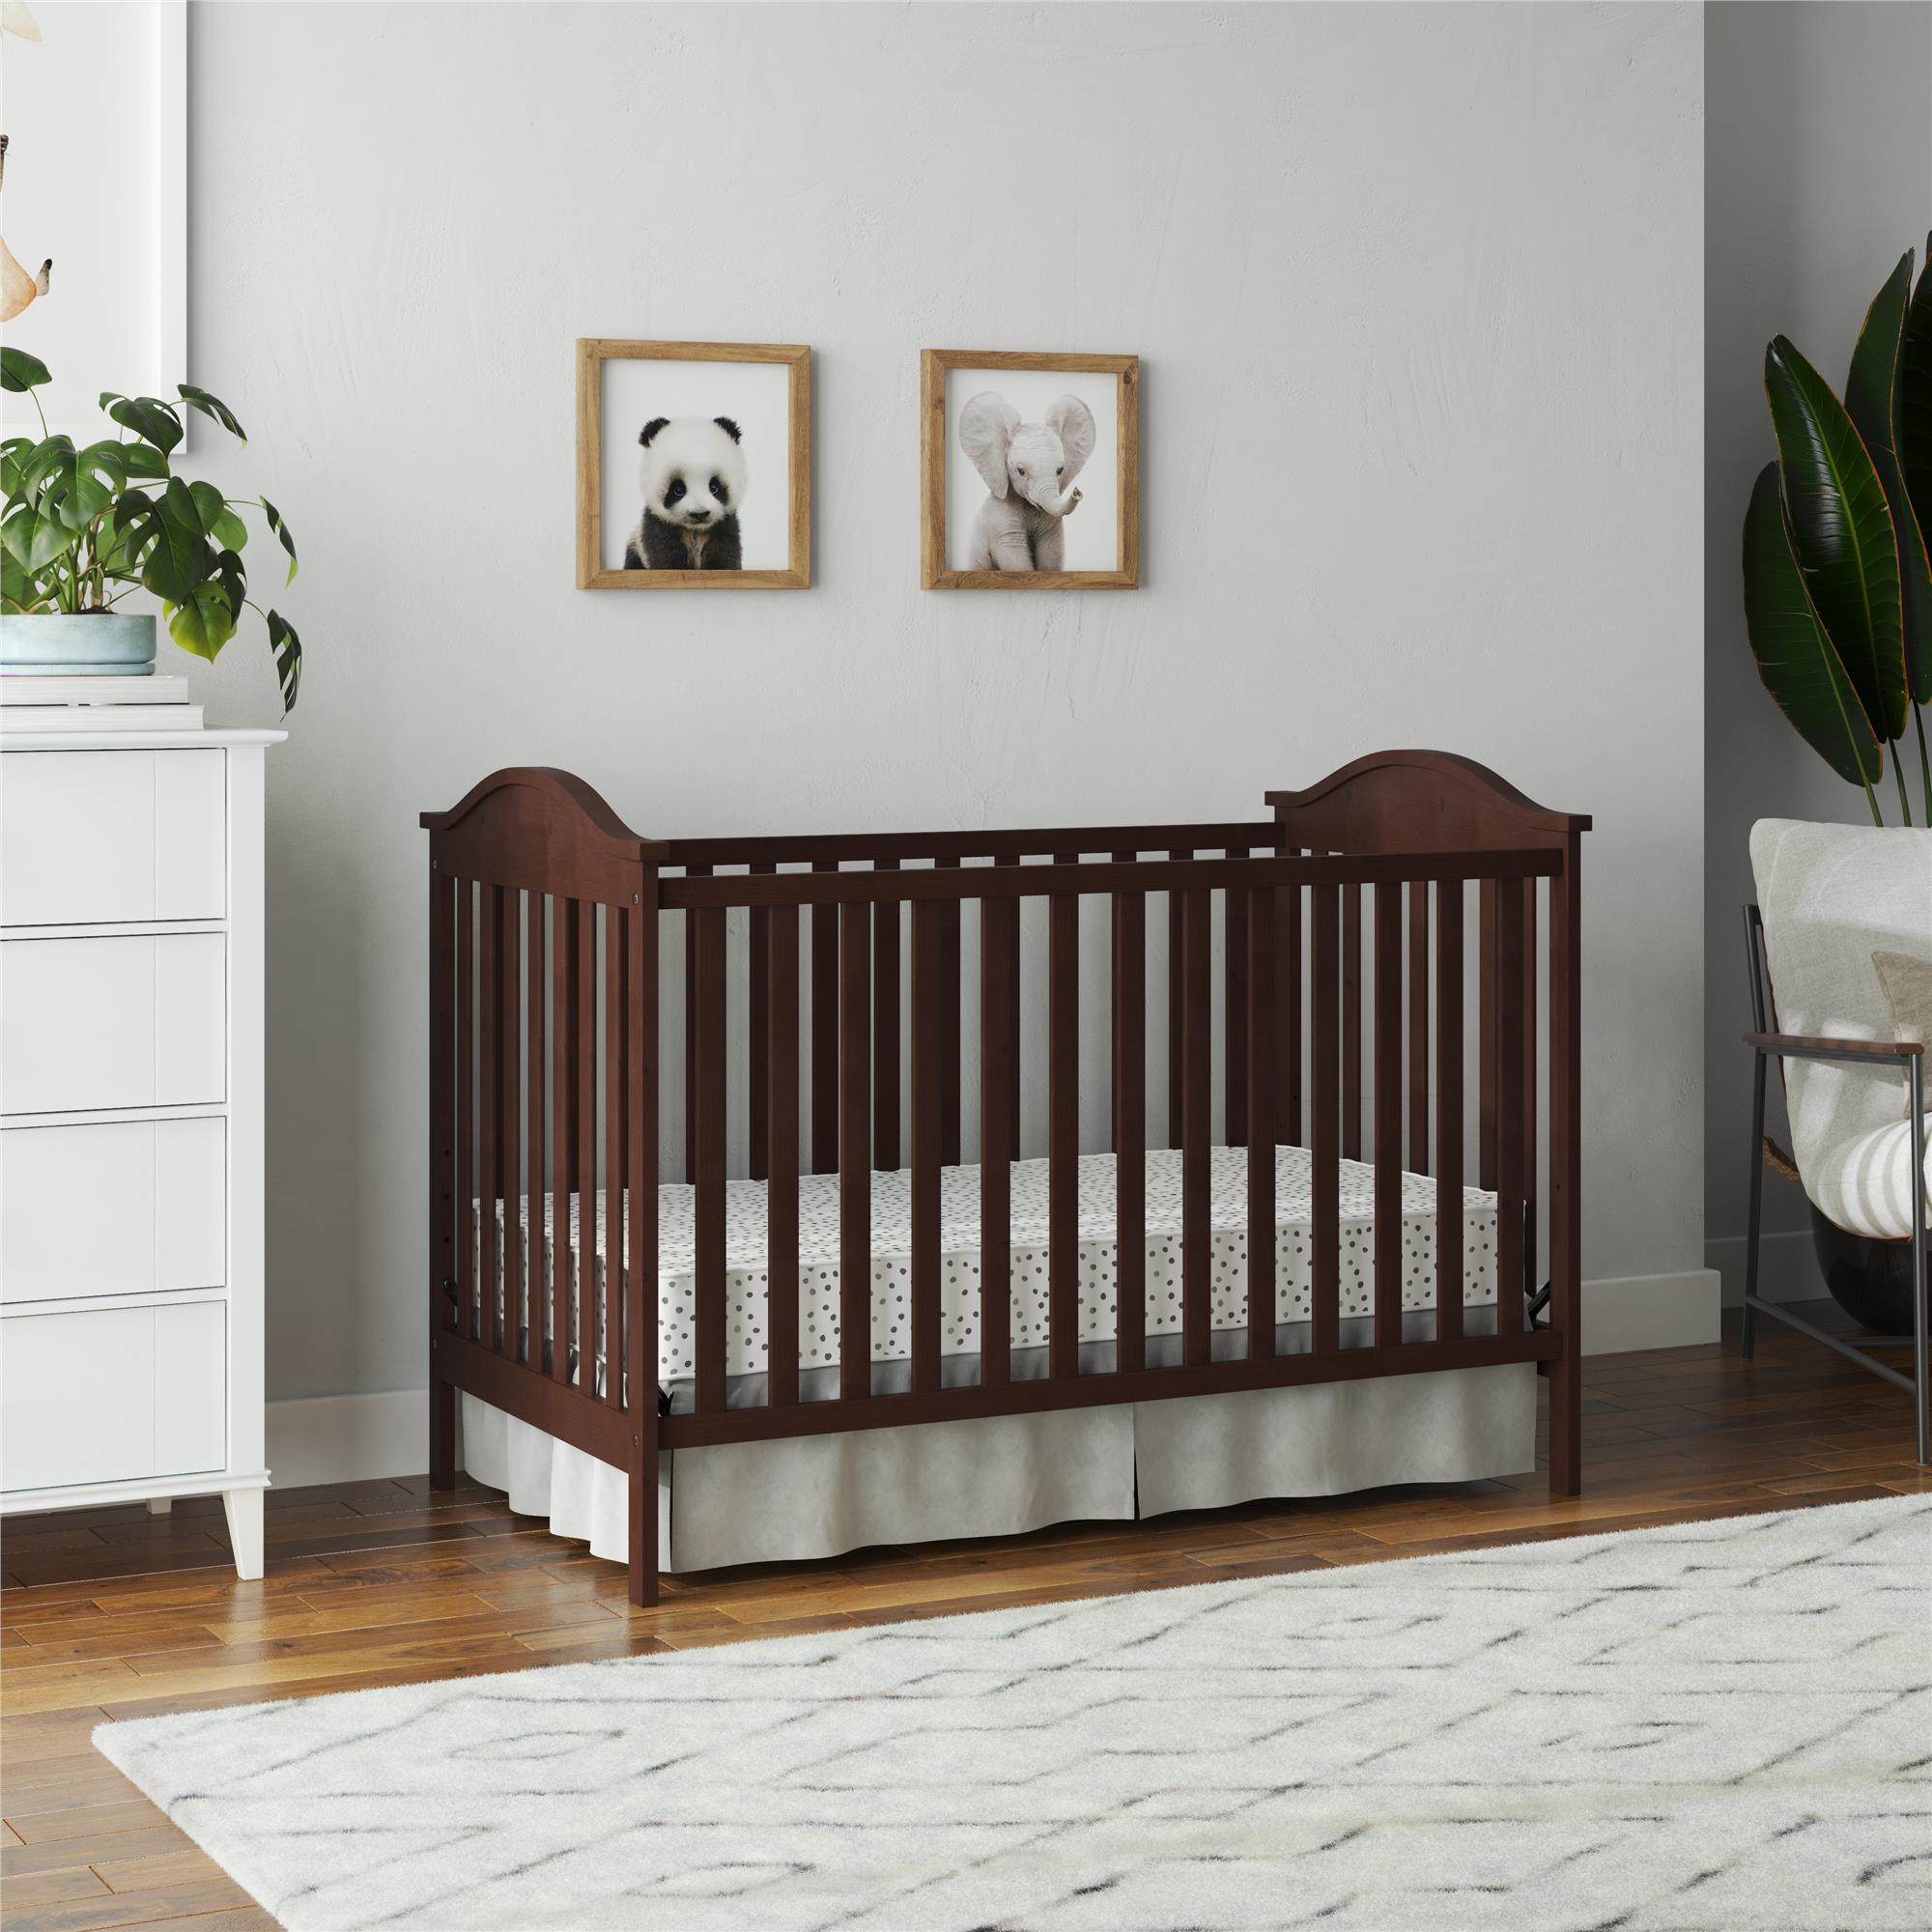 Baby Relax Adele 3-in-1 Convertible Crib, Espresso - image 1 of 13